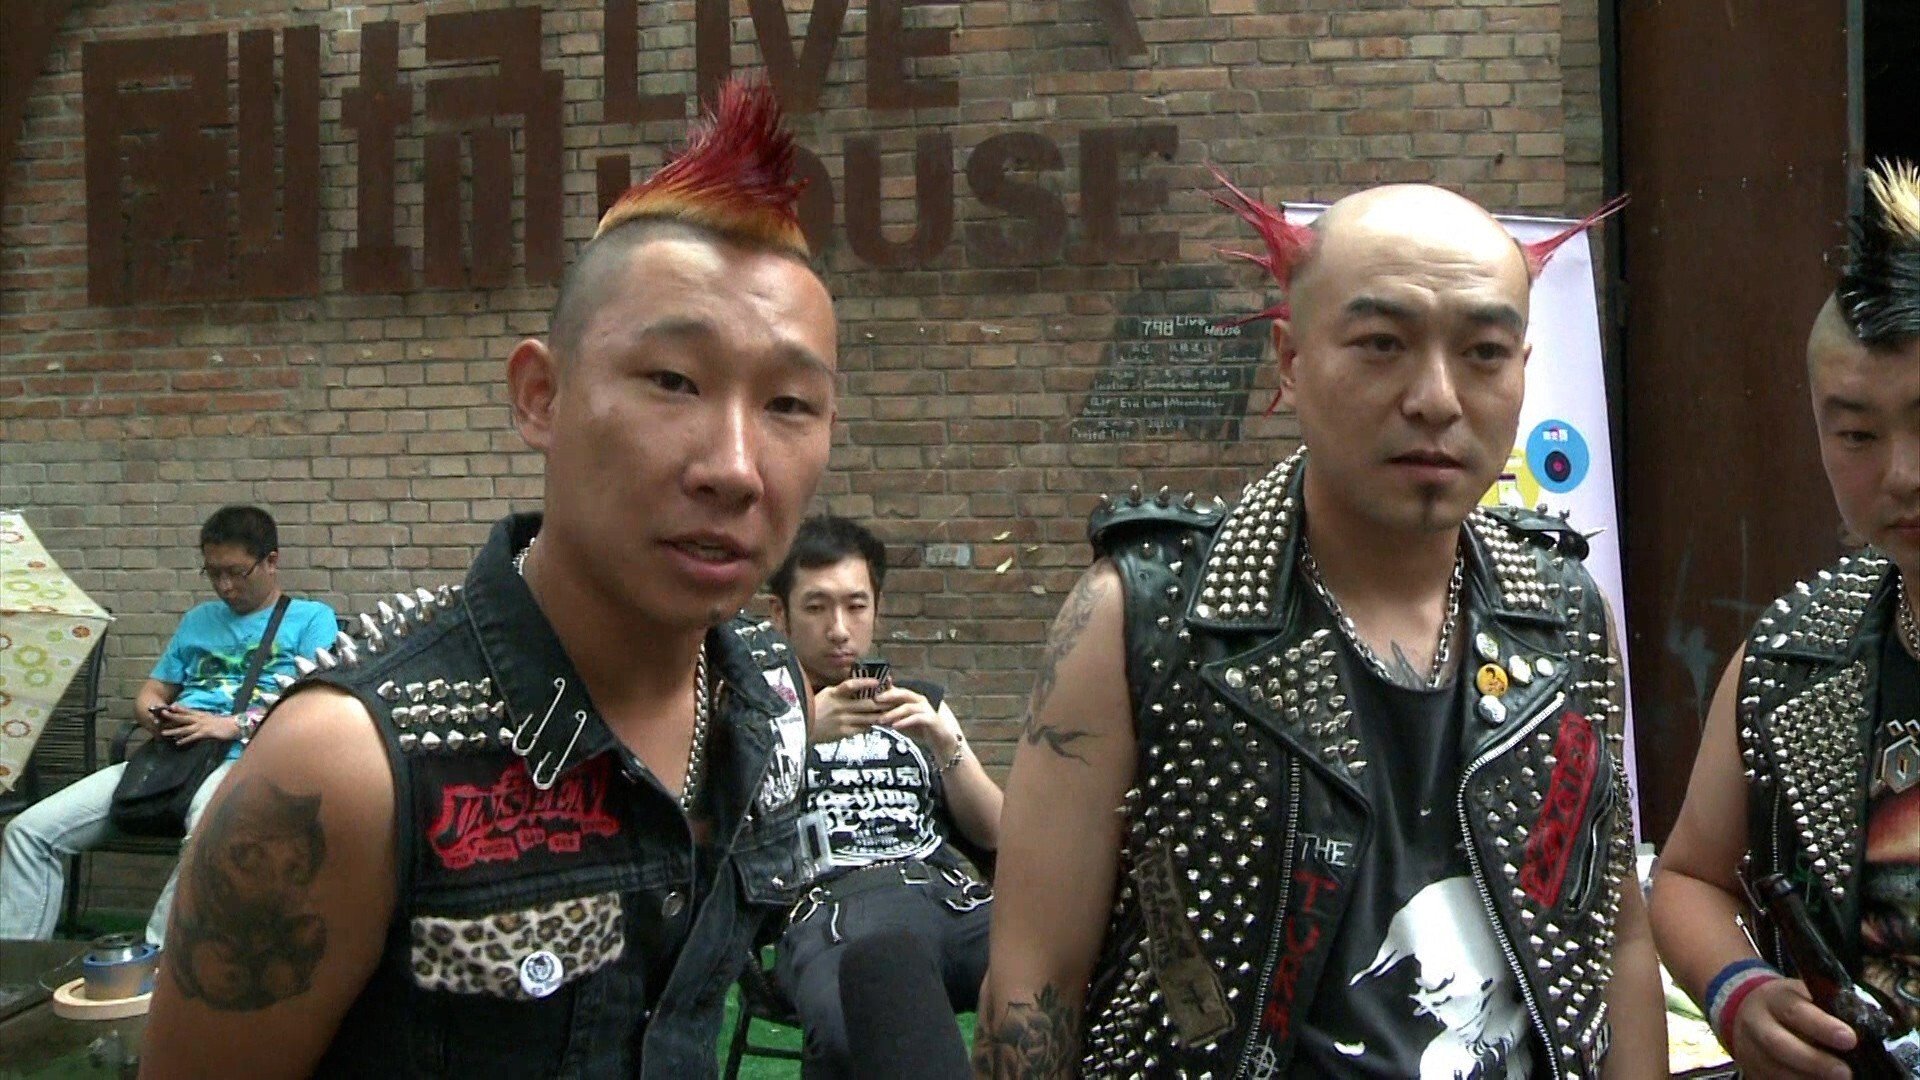 Wuhan calling: how the city's punk rock scene changed China's youth